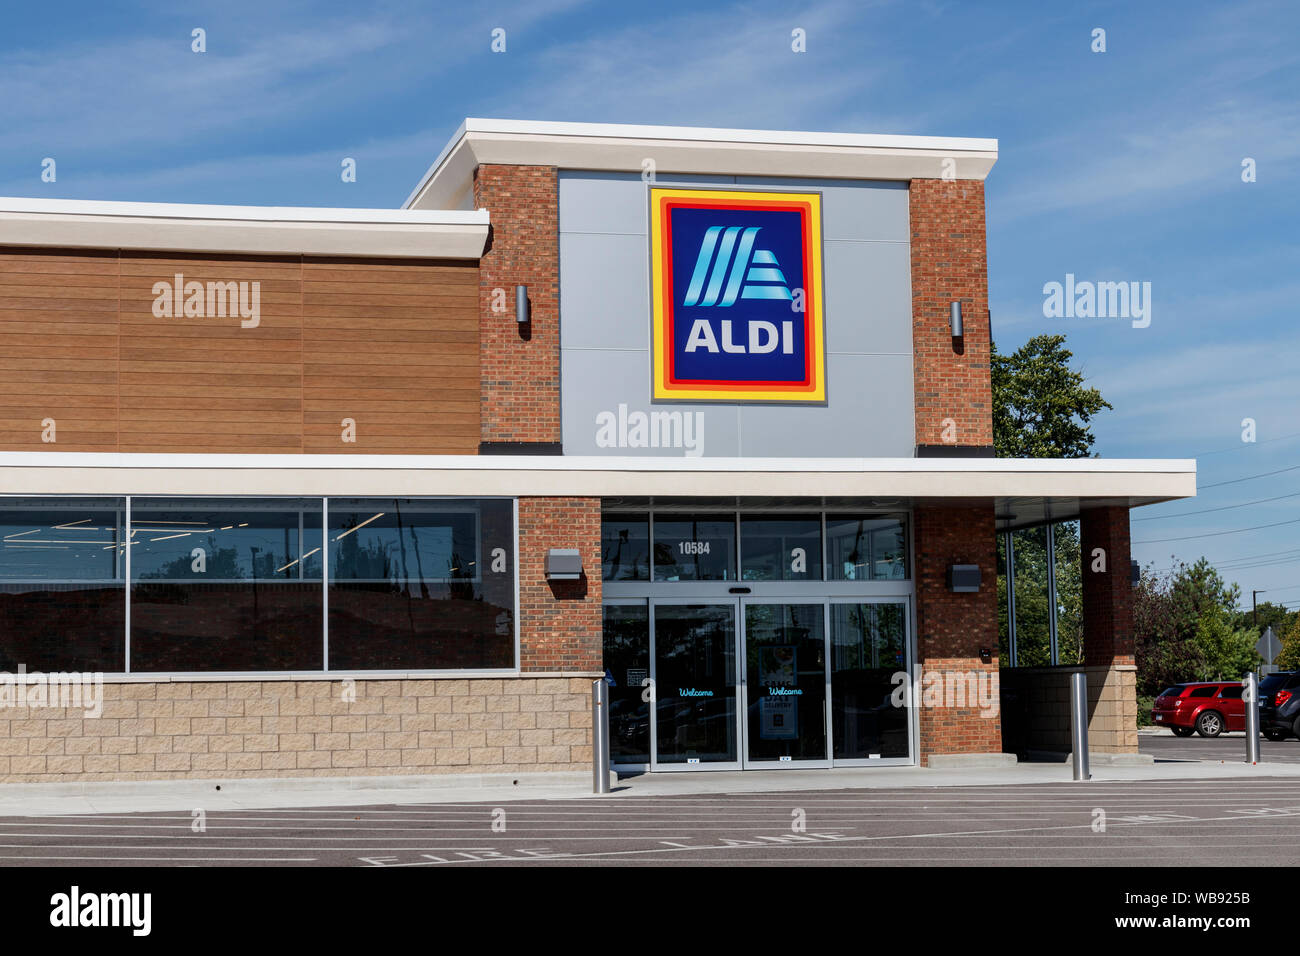 Carmel - Circa August 2019: Aldi Discount Supermarket. Aldi sells a range of grocery items, including produce, meat & dairy, at discount prices III Stock Photo